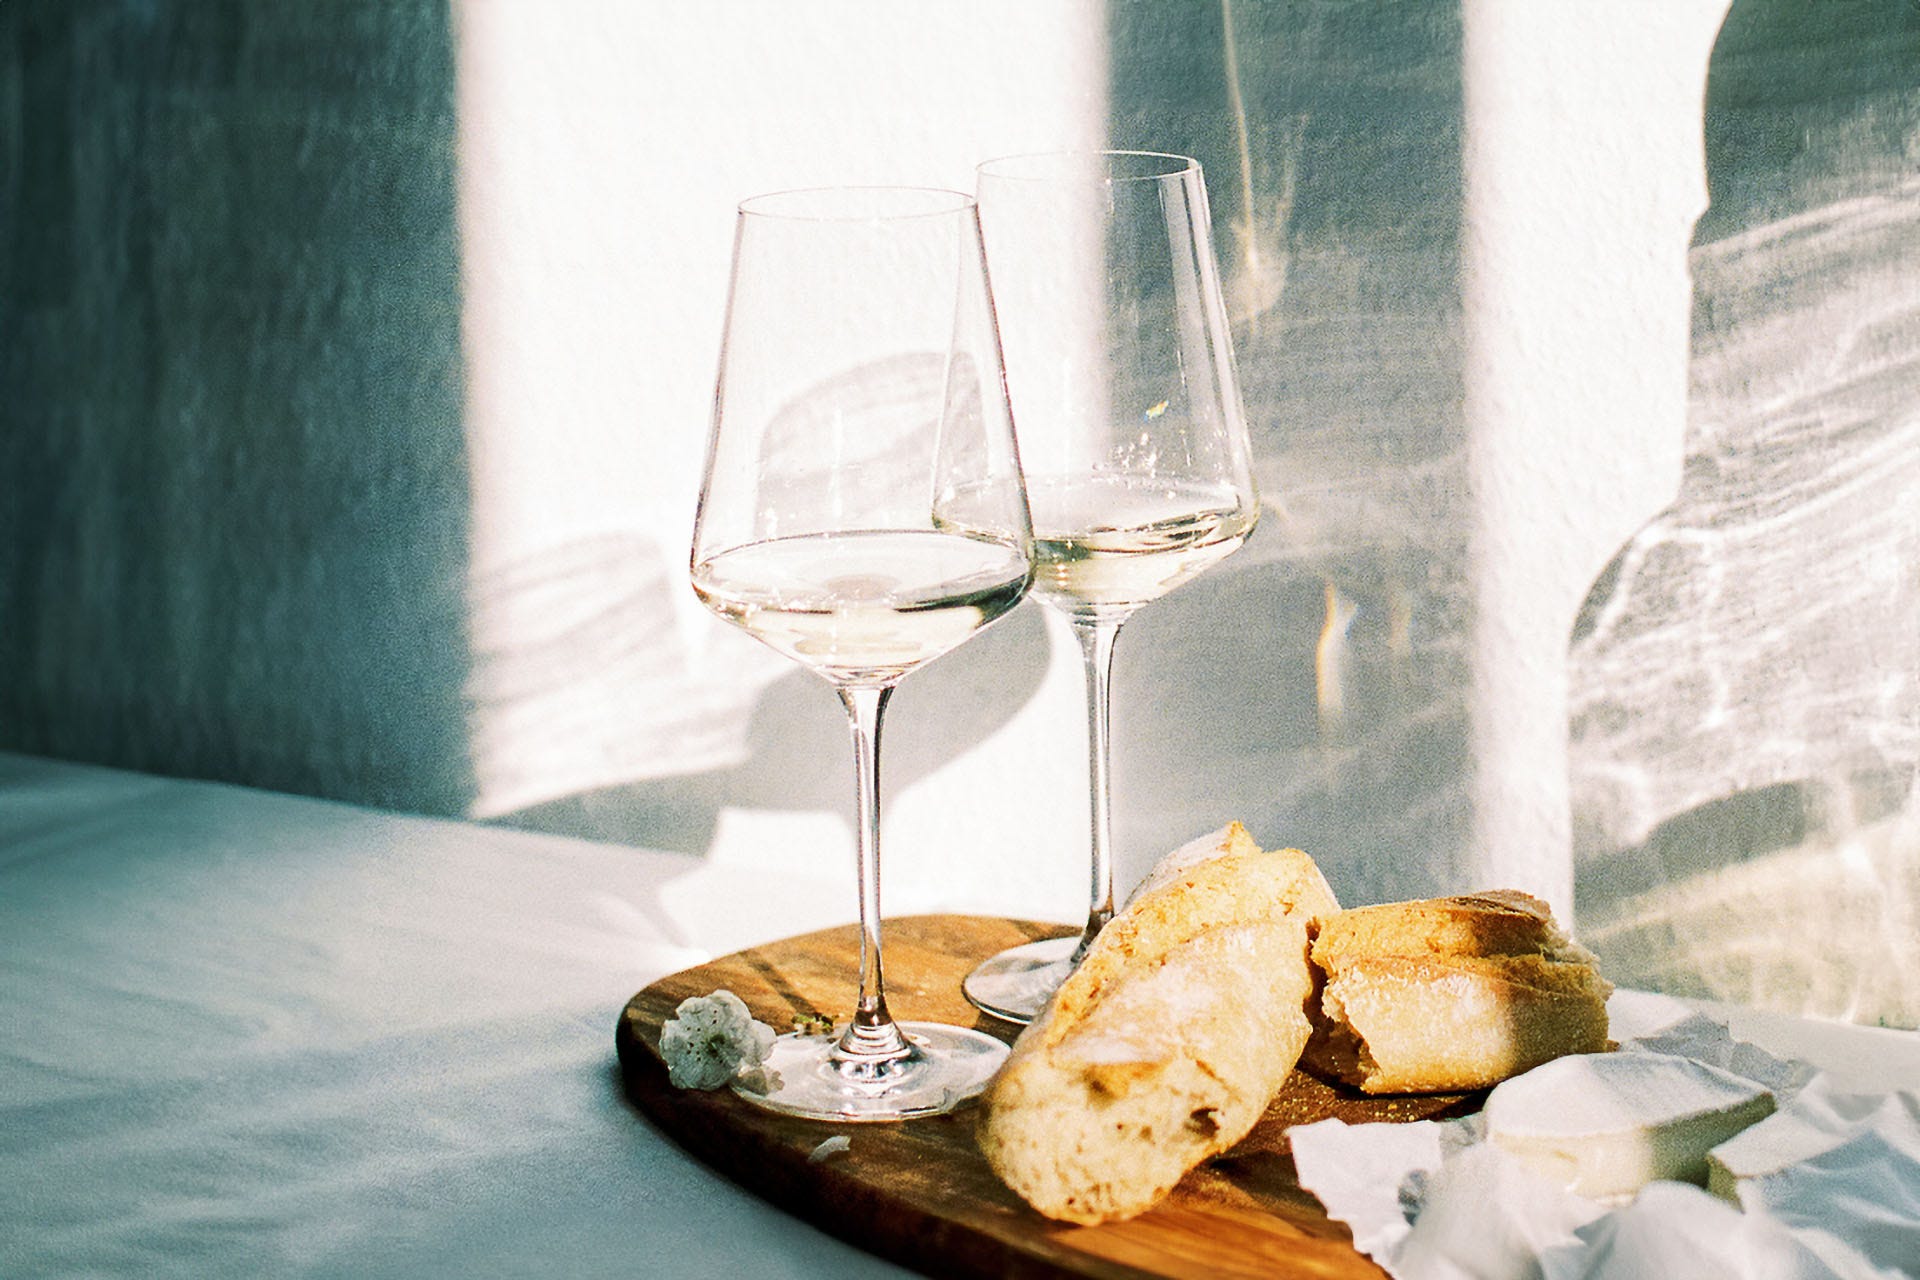 wine with fresh french bread and cheese during sunset time indoors